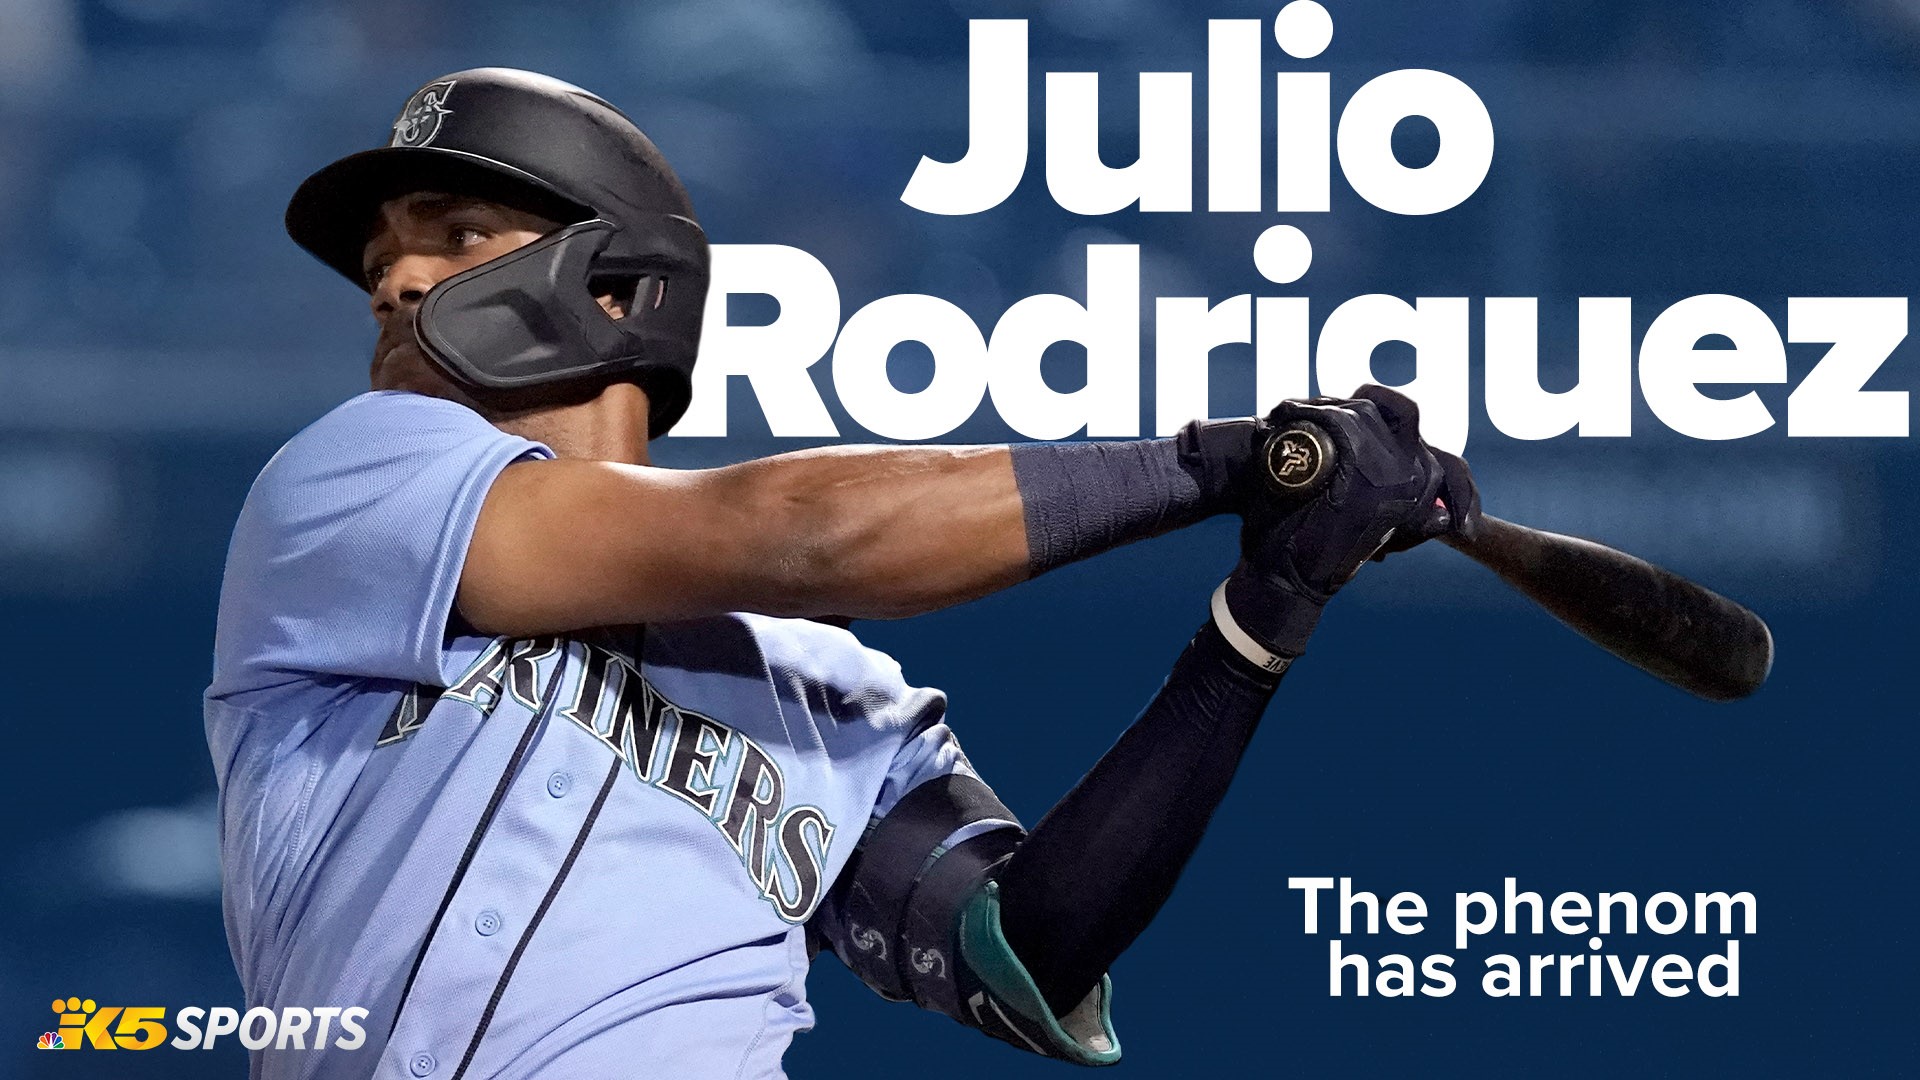 One of baseball's hottest prospects has had a momentous couple of years, including an Olympic medal and a call up to the majors